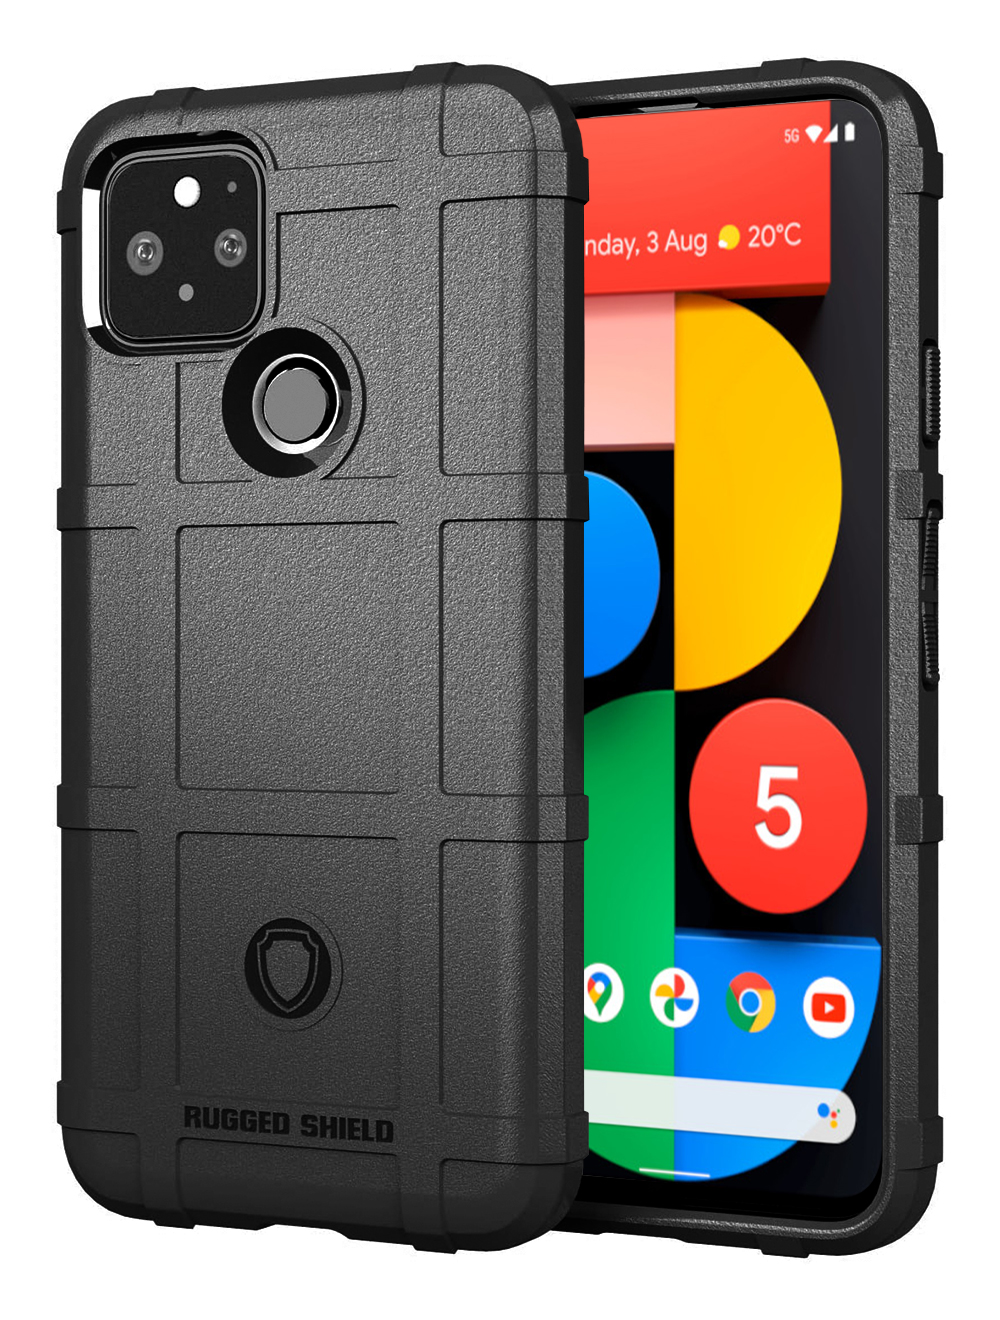 Black case protective with geometric design for Google Pixel 5 cell phones